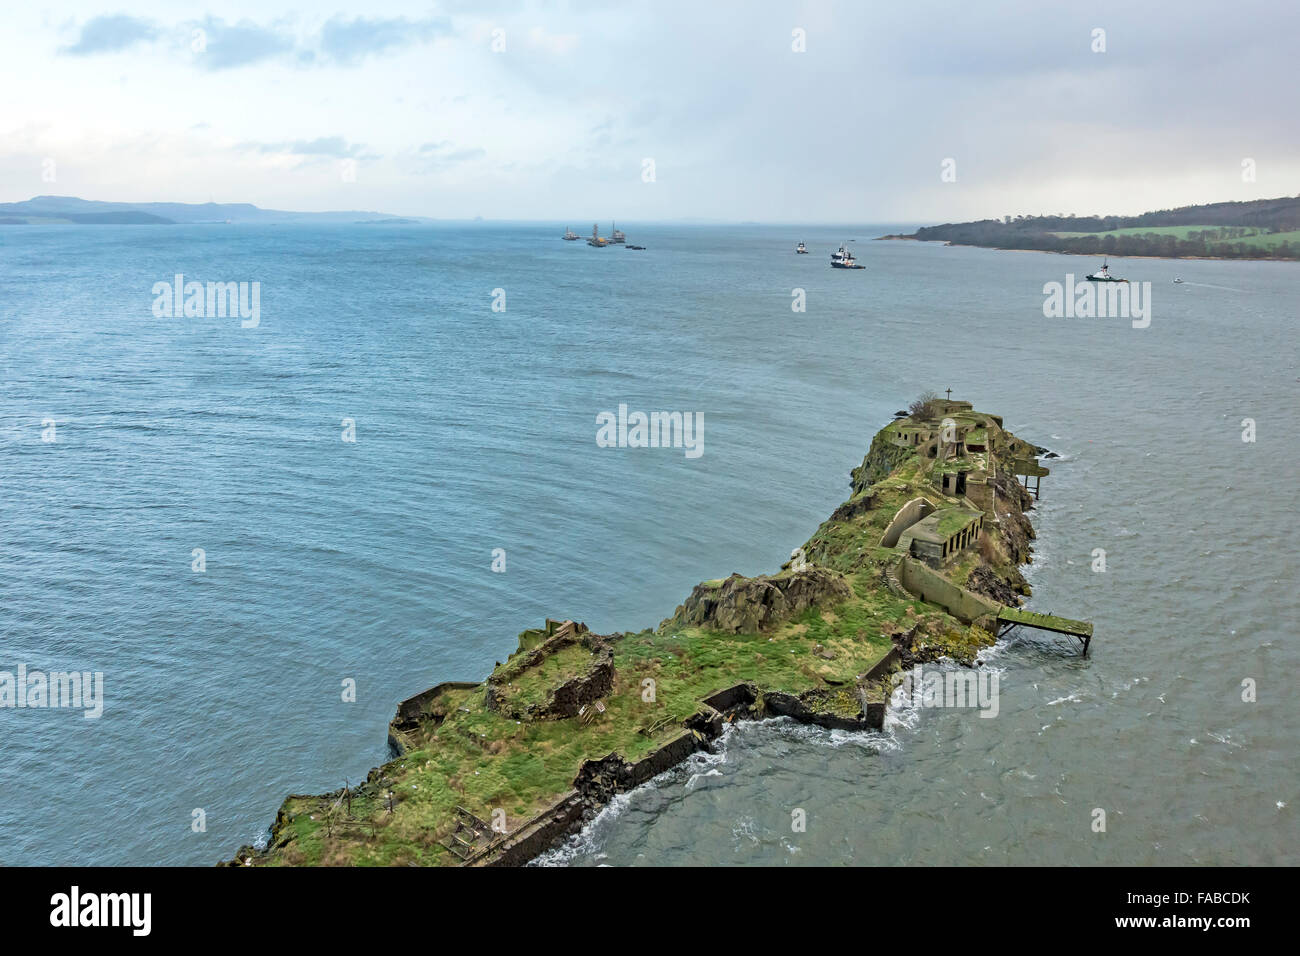 Island Inch Garvie from above Firth of Forth near South Queensferry in Scotland showing remnant ruins from WW2 gun emplacements Stock Photo